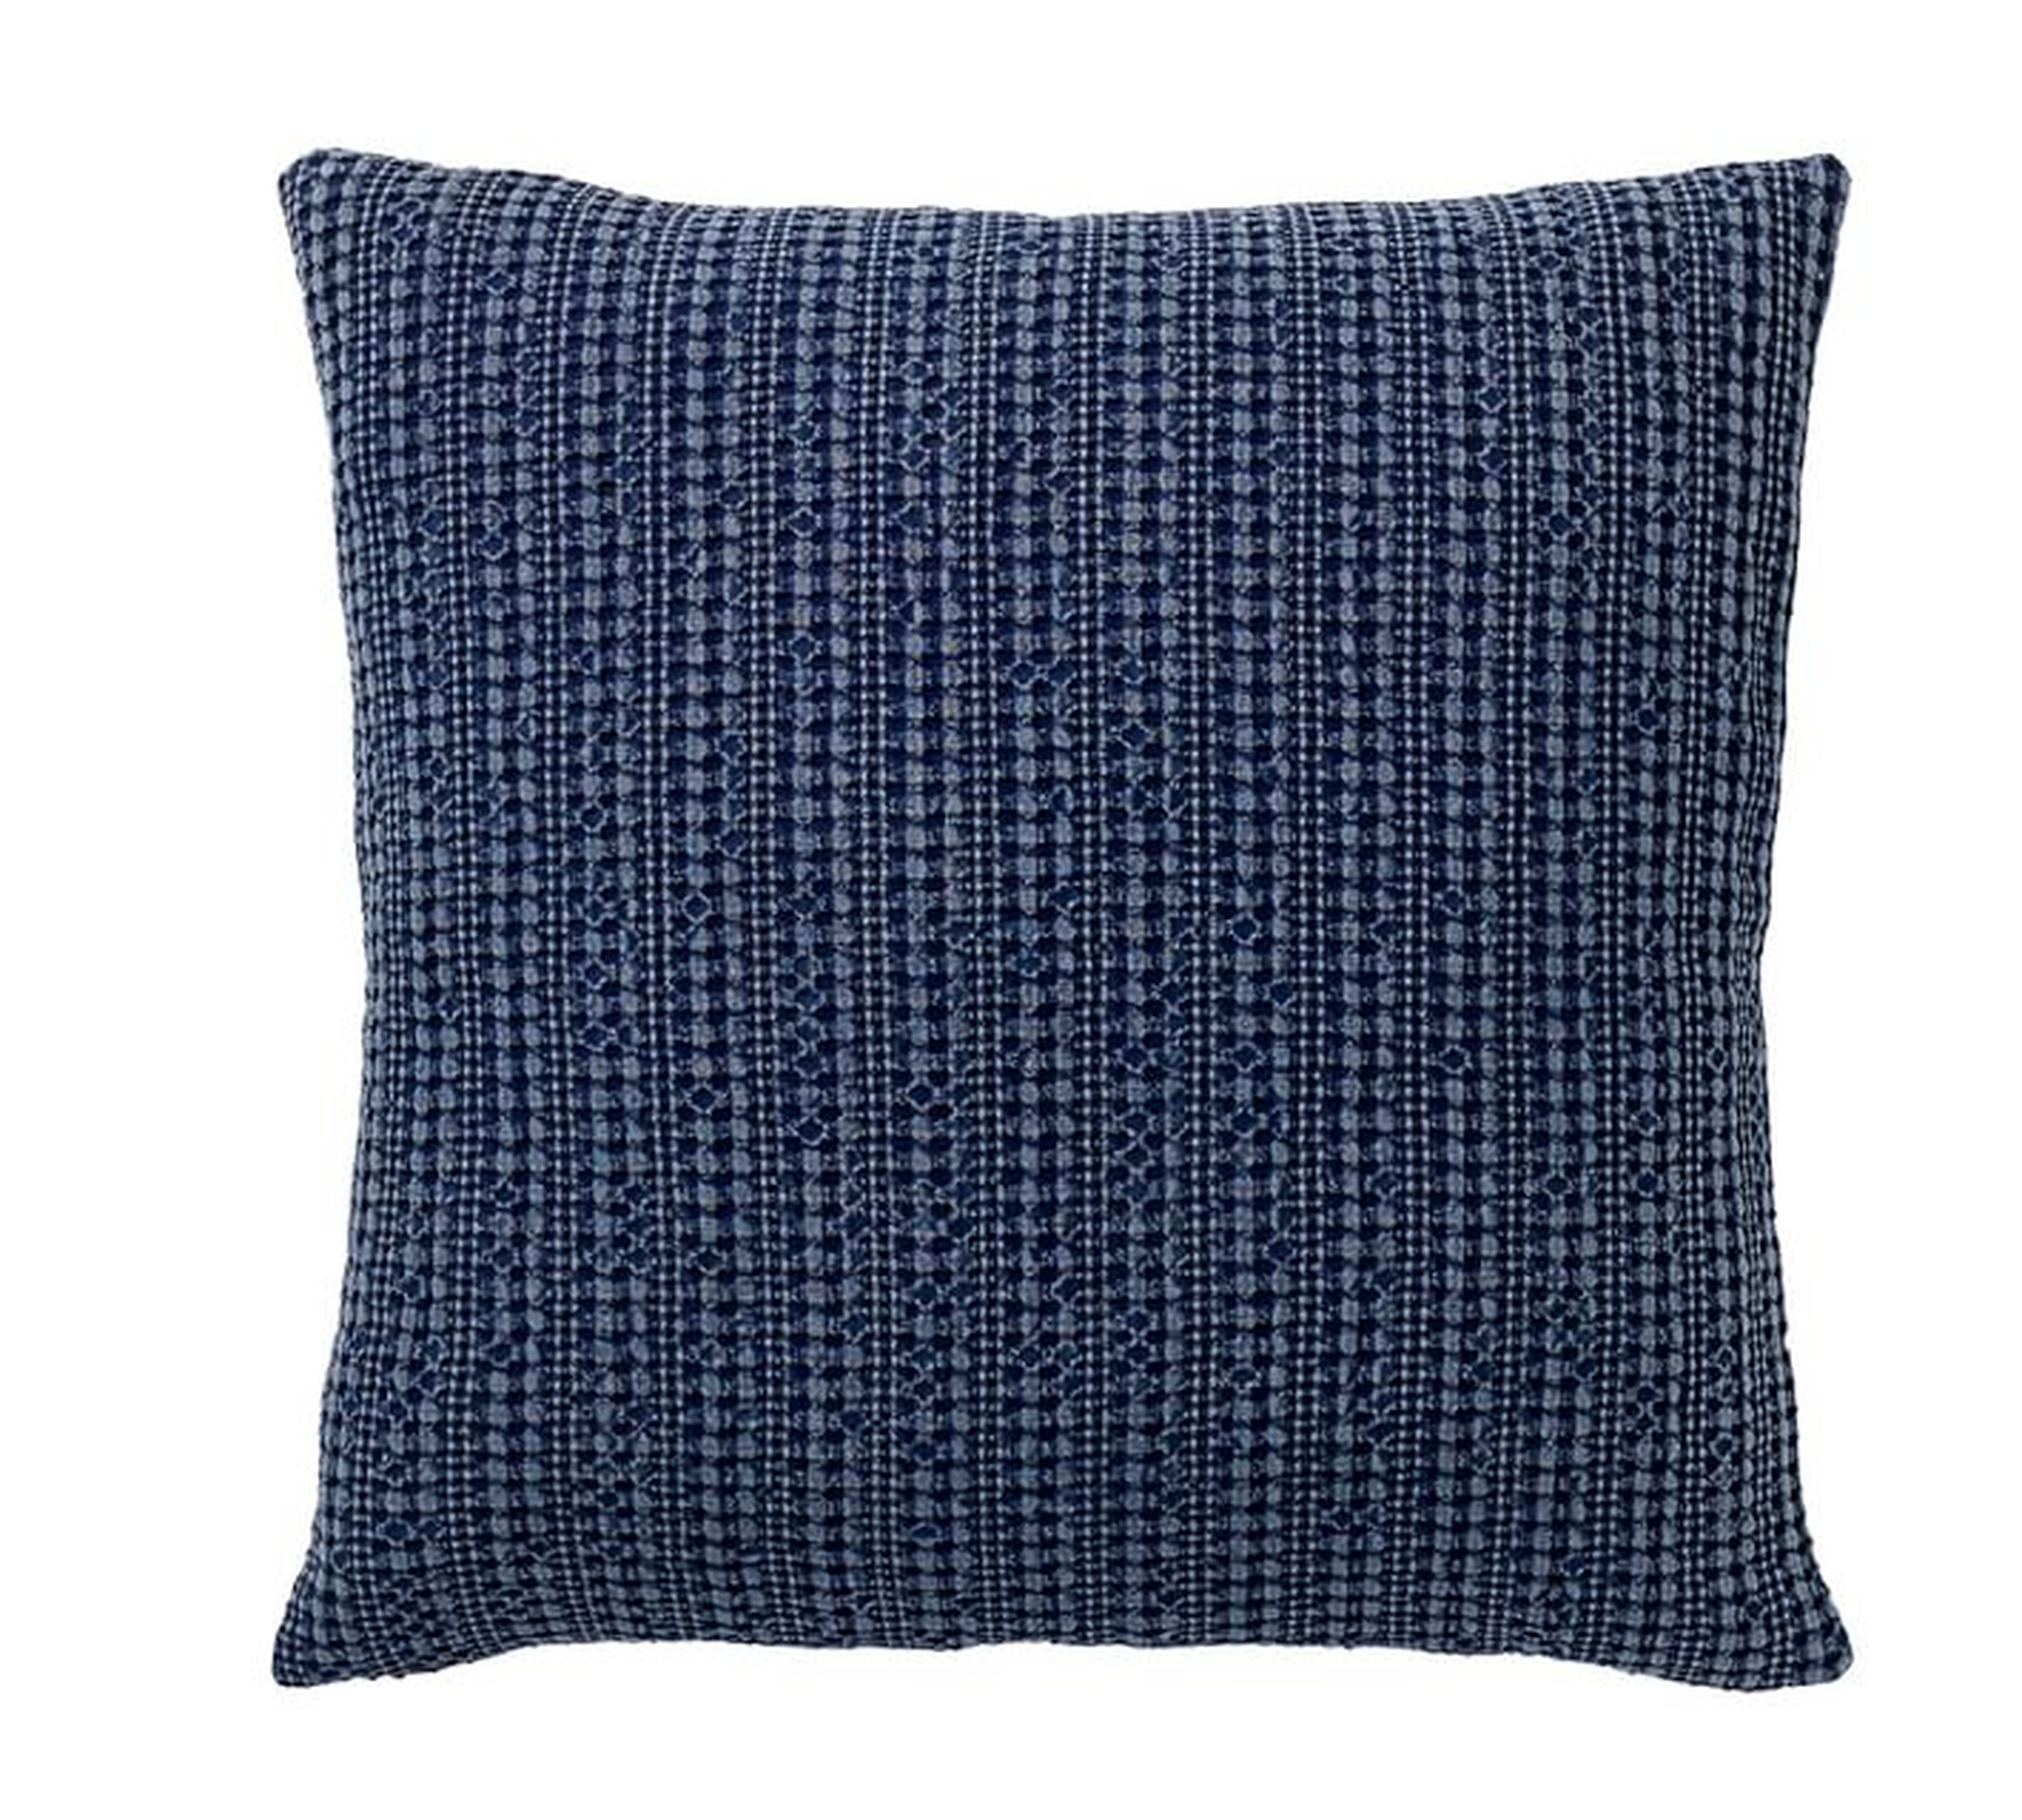 Honeycomb Pillow Cover, 18", Sailor Blue - Pottery Barn